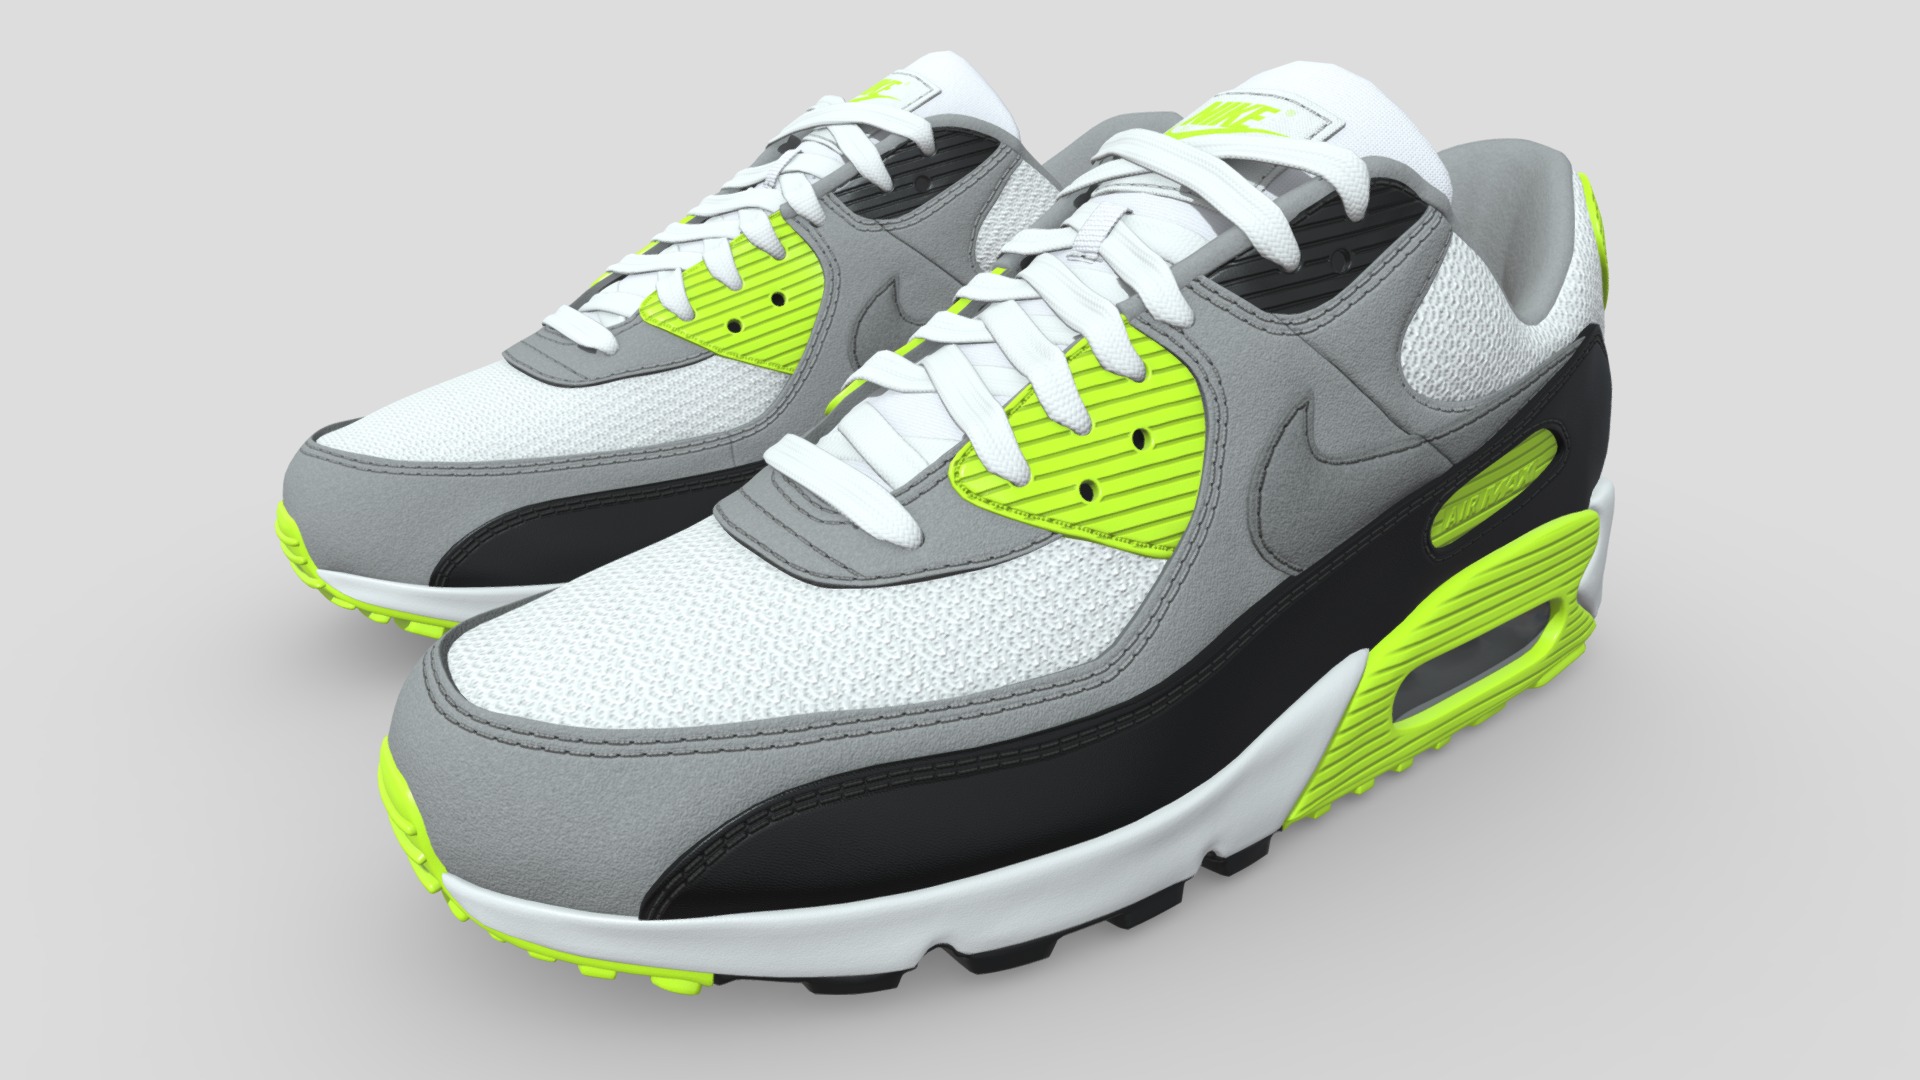 3D model Air Max 90 Nike - This is a 3D model of the Air Max 90 Nike. The 3D model is about a pair of black and white sneakers.